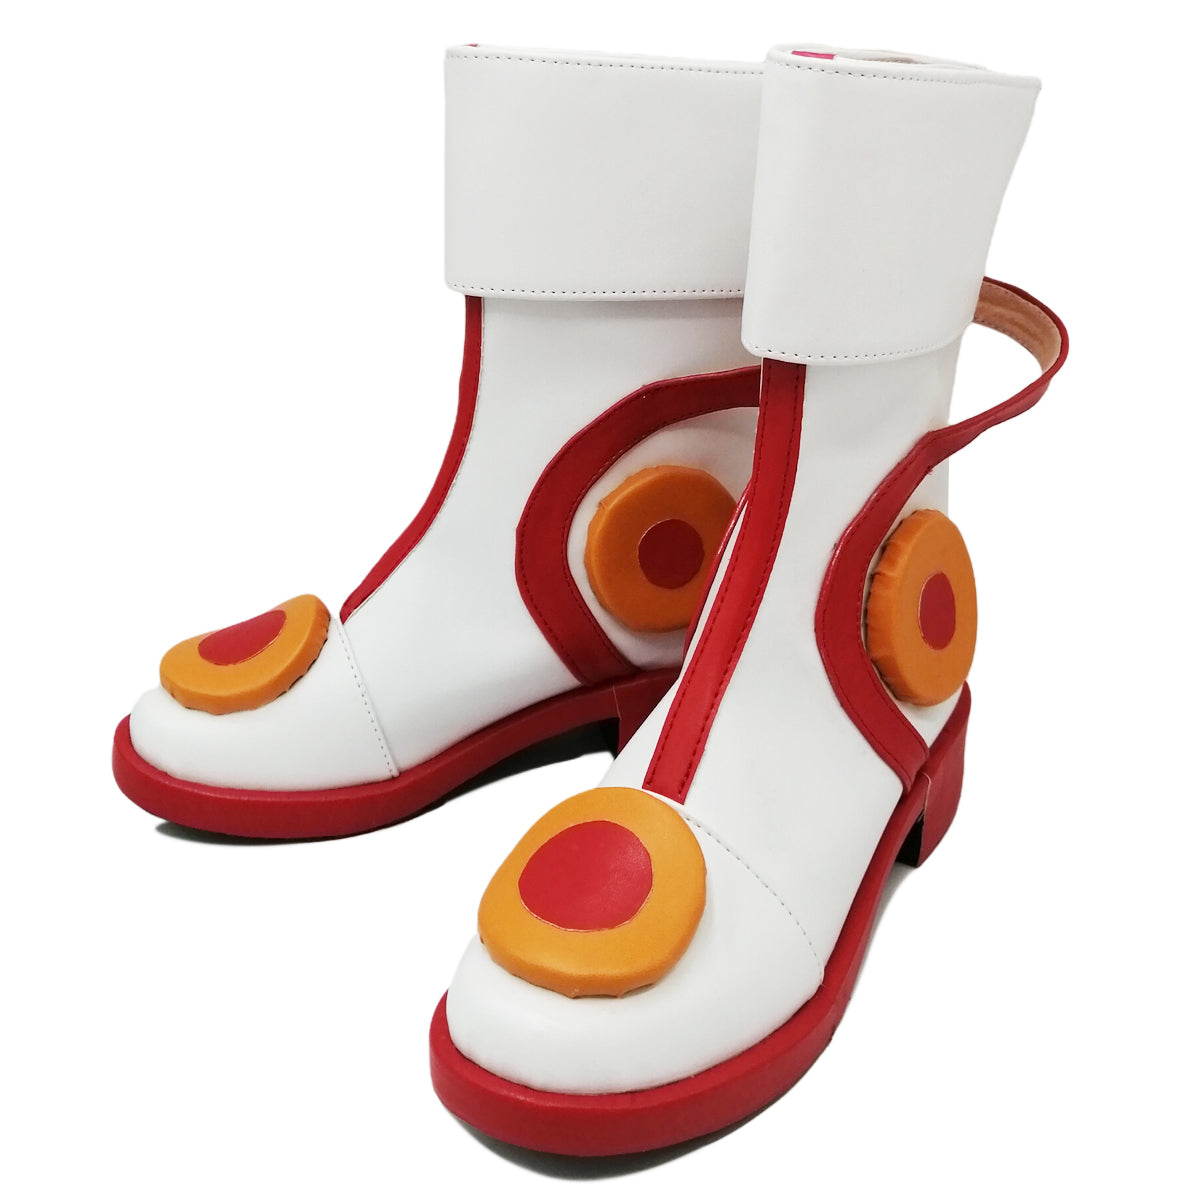 Big Red Boot Astro Boy Fashion Trend Big Red Boots Anime Creative | eBay